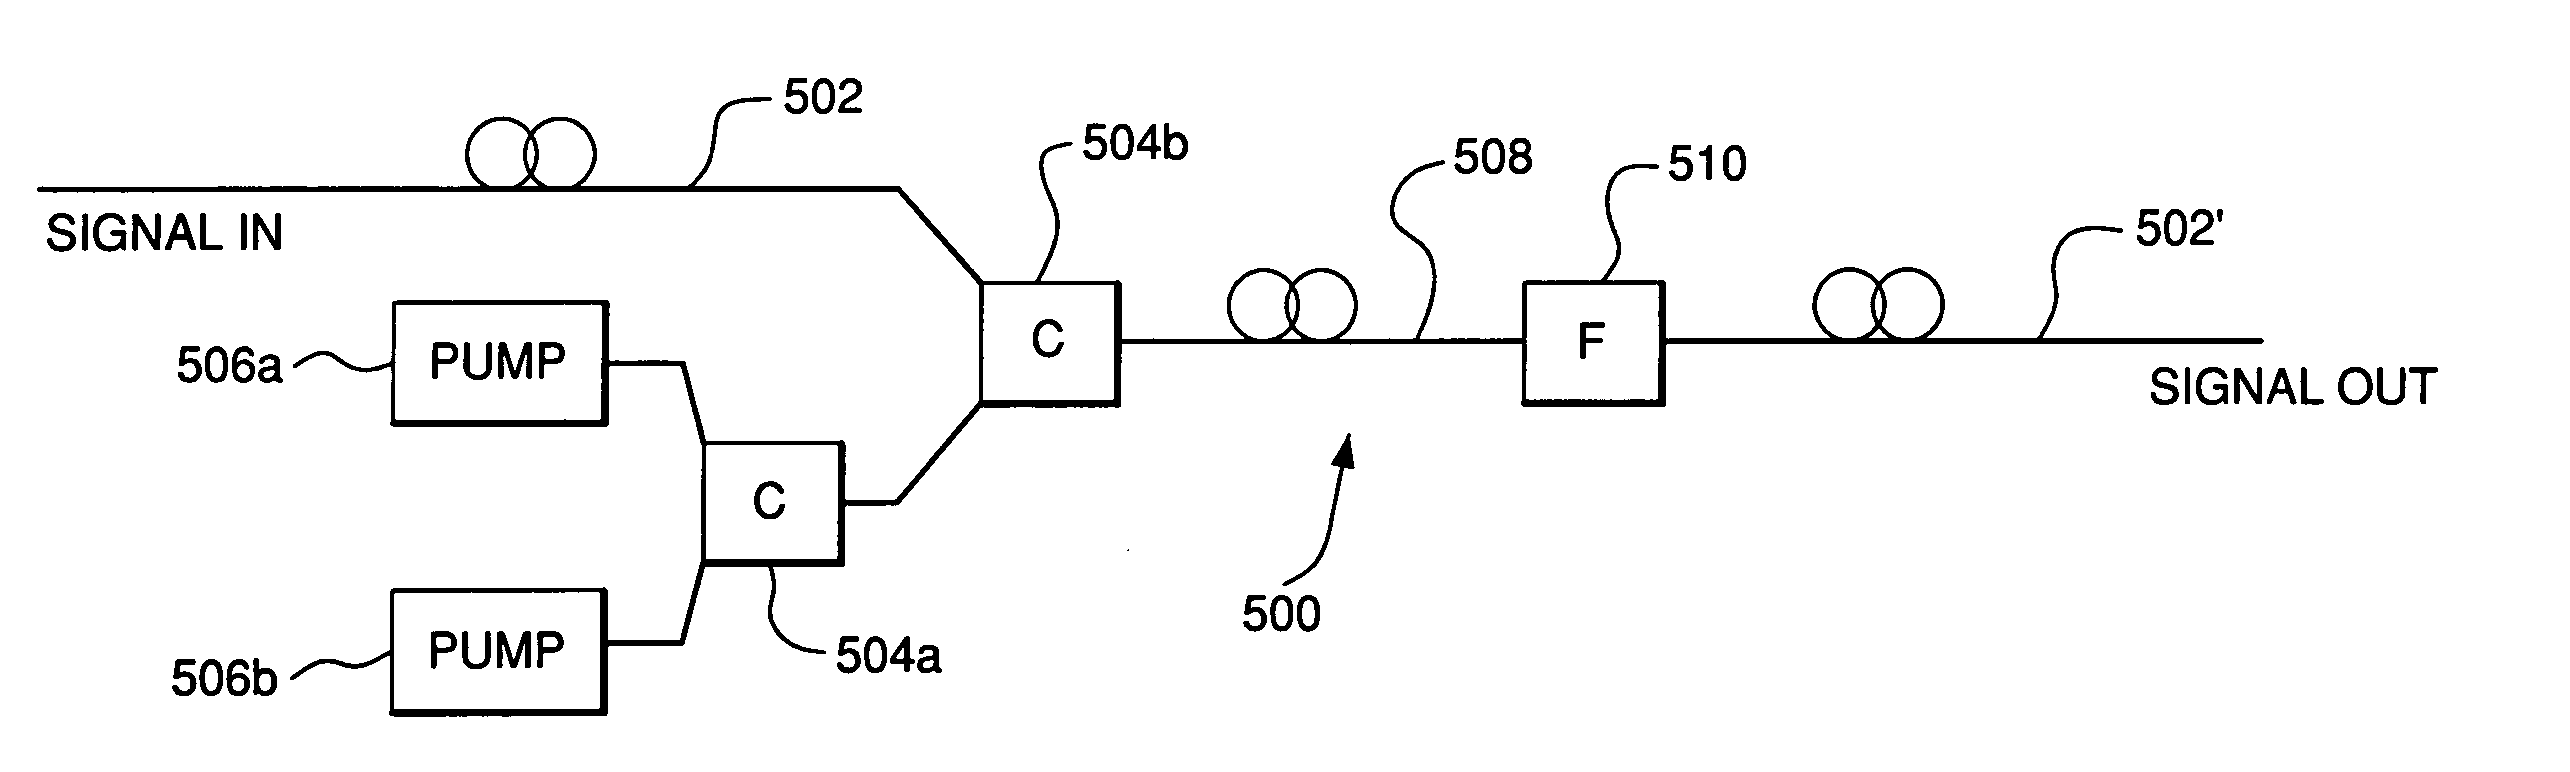 Phase-sensitive amplification in a fiber